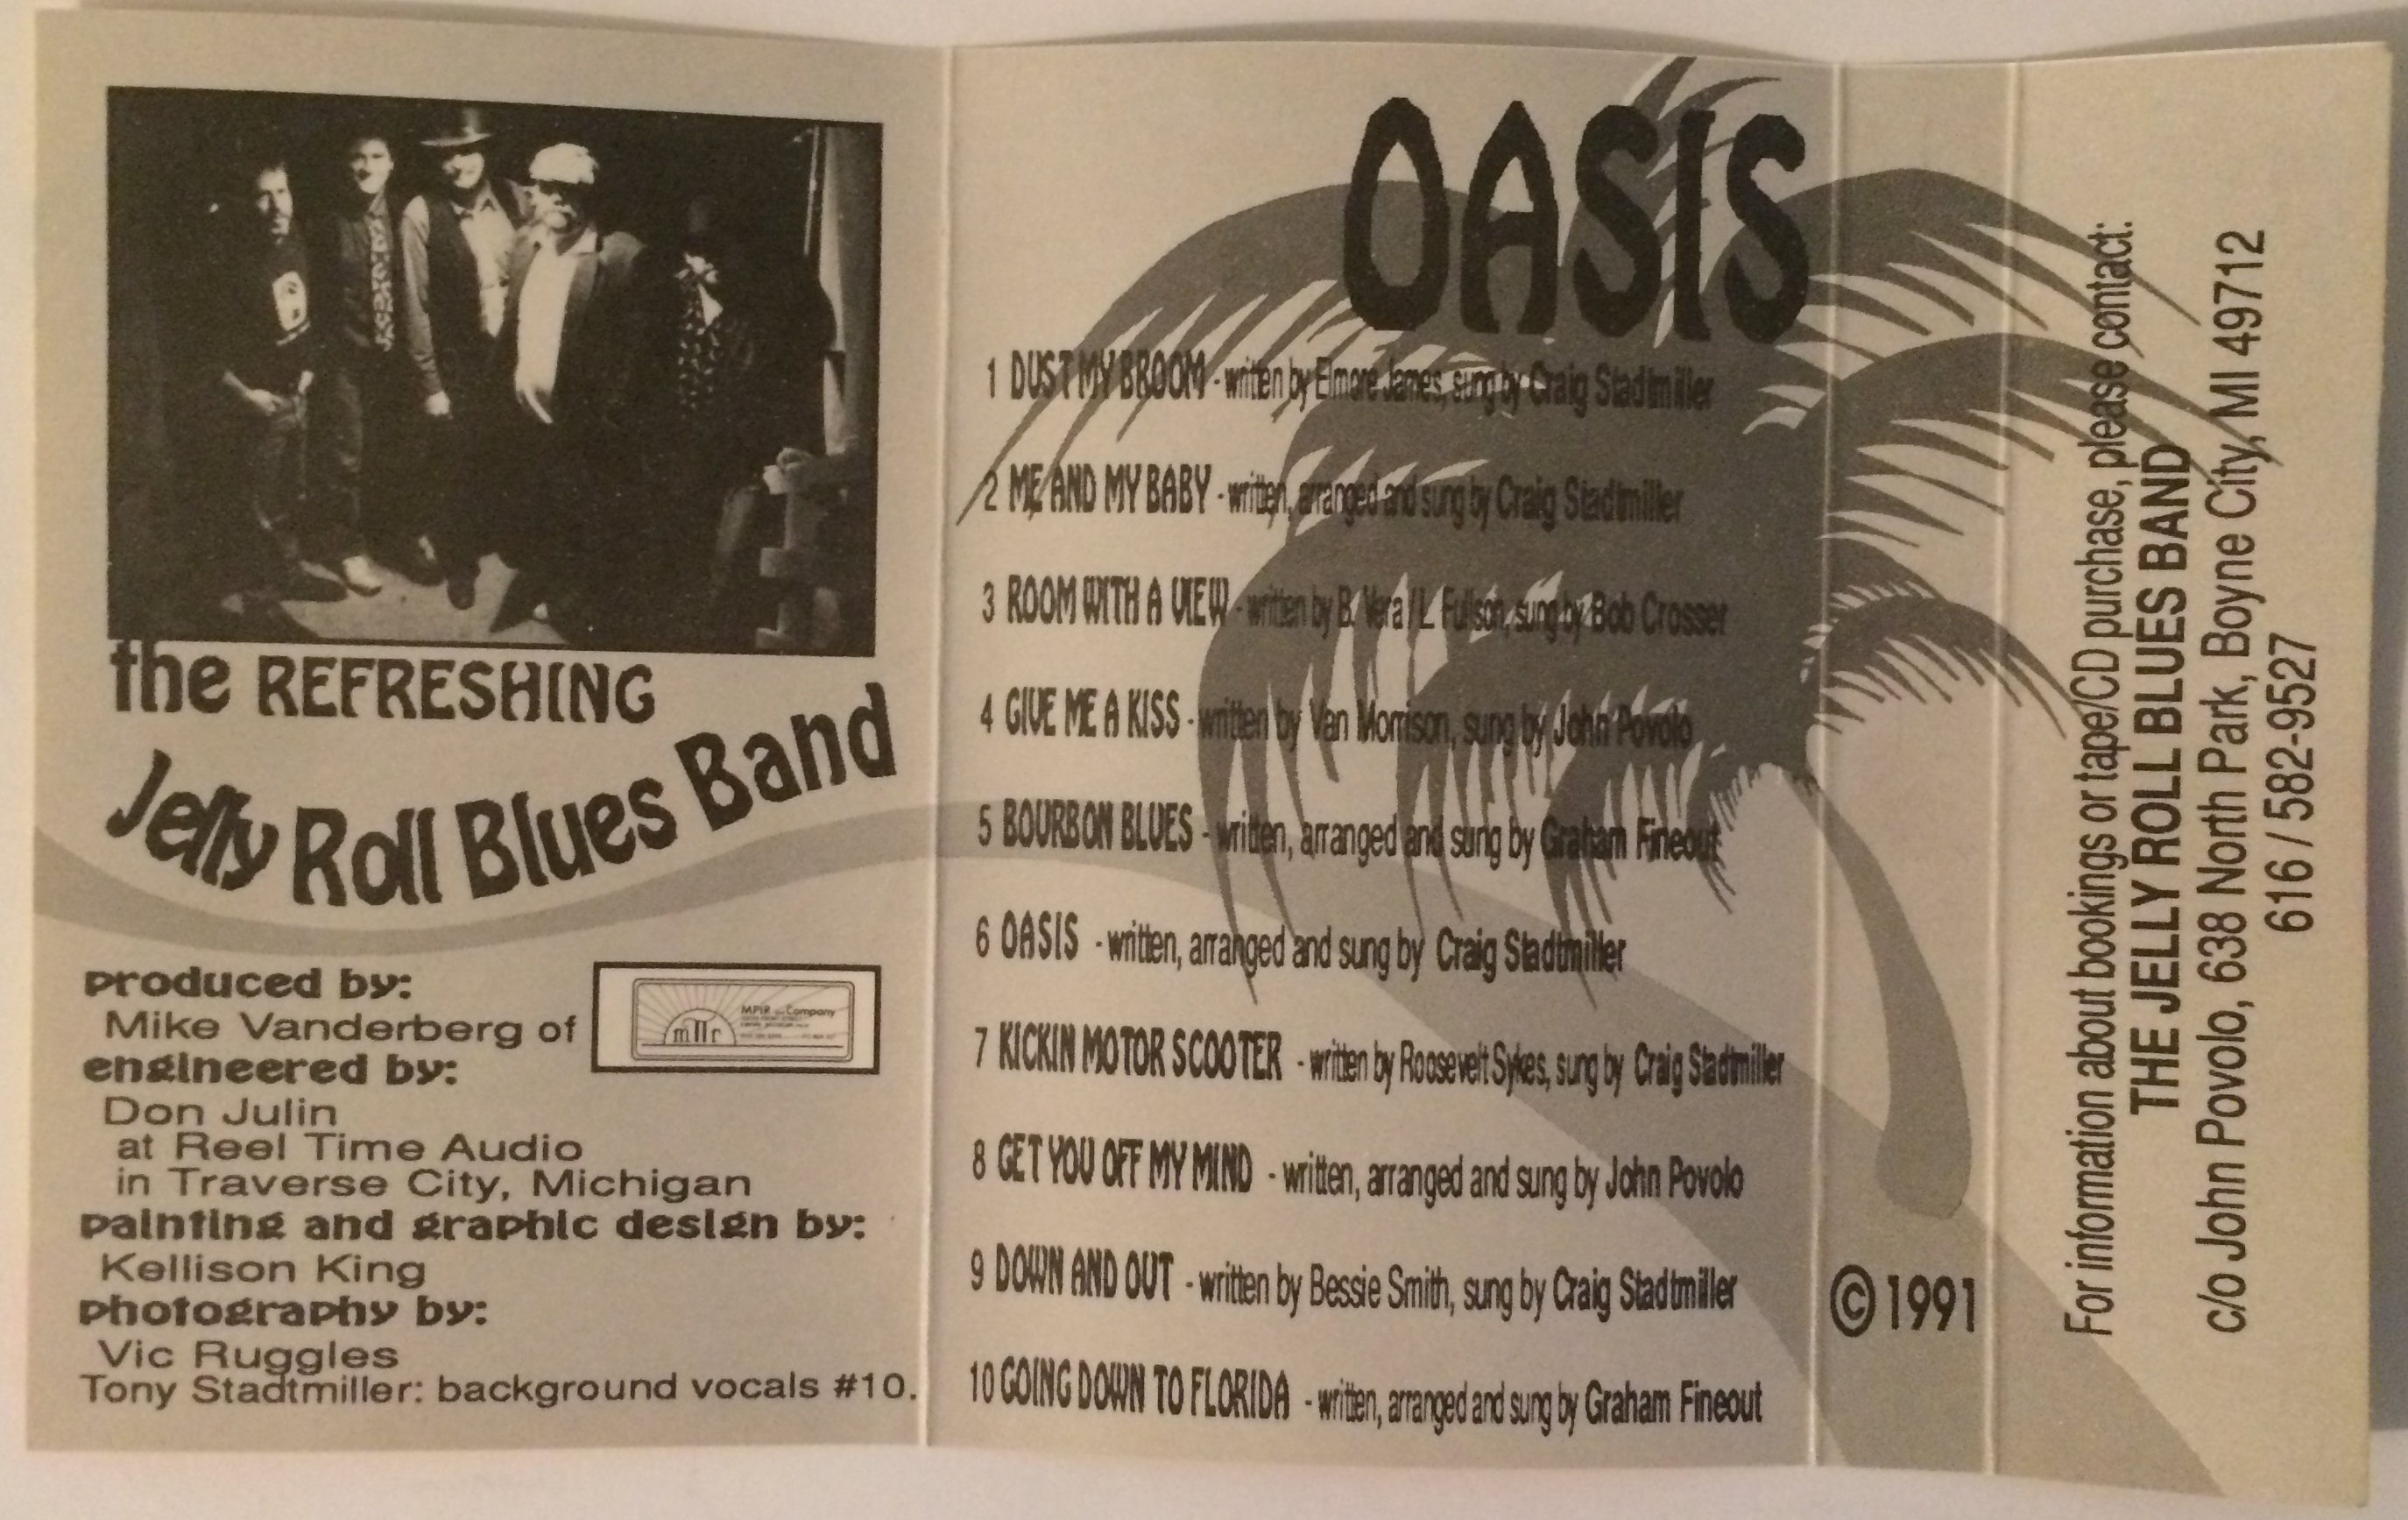 Jelly Roll Band Blues - Oasis